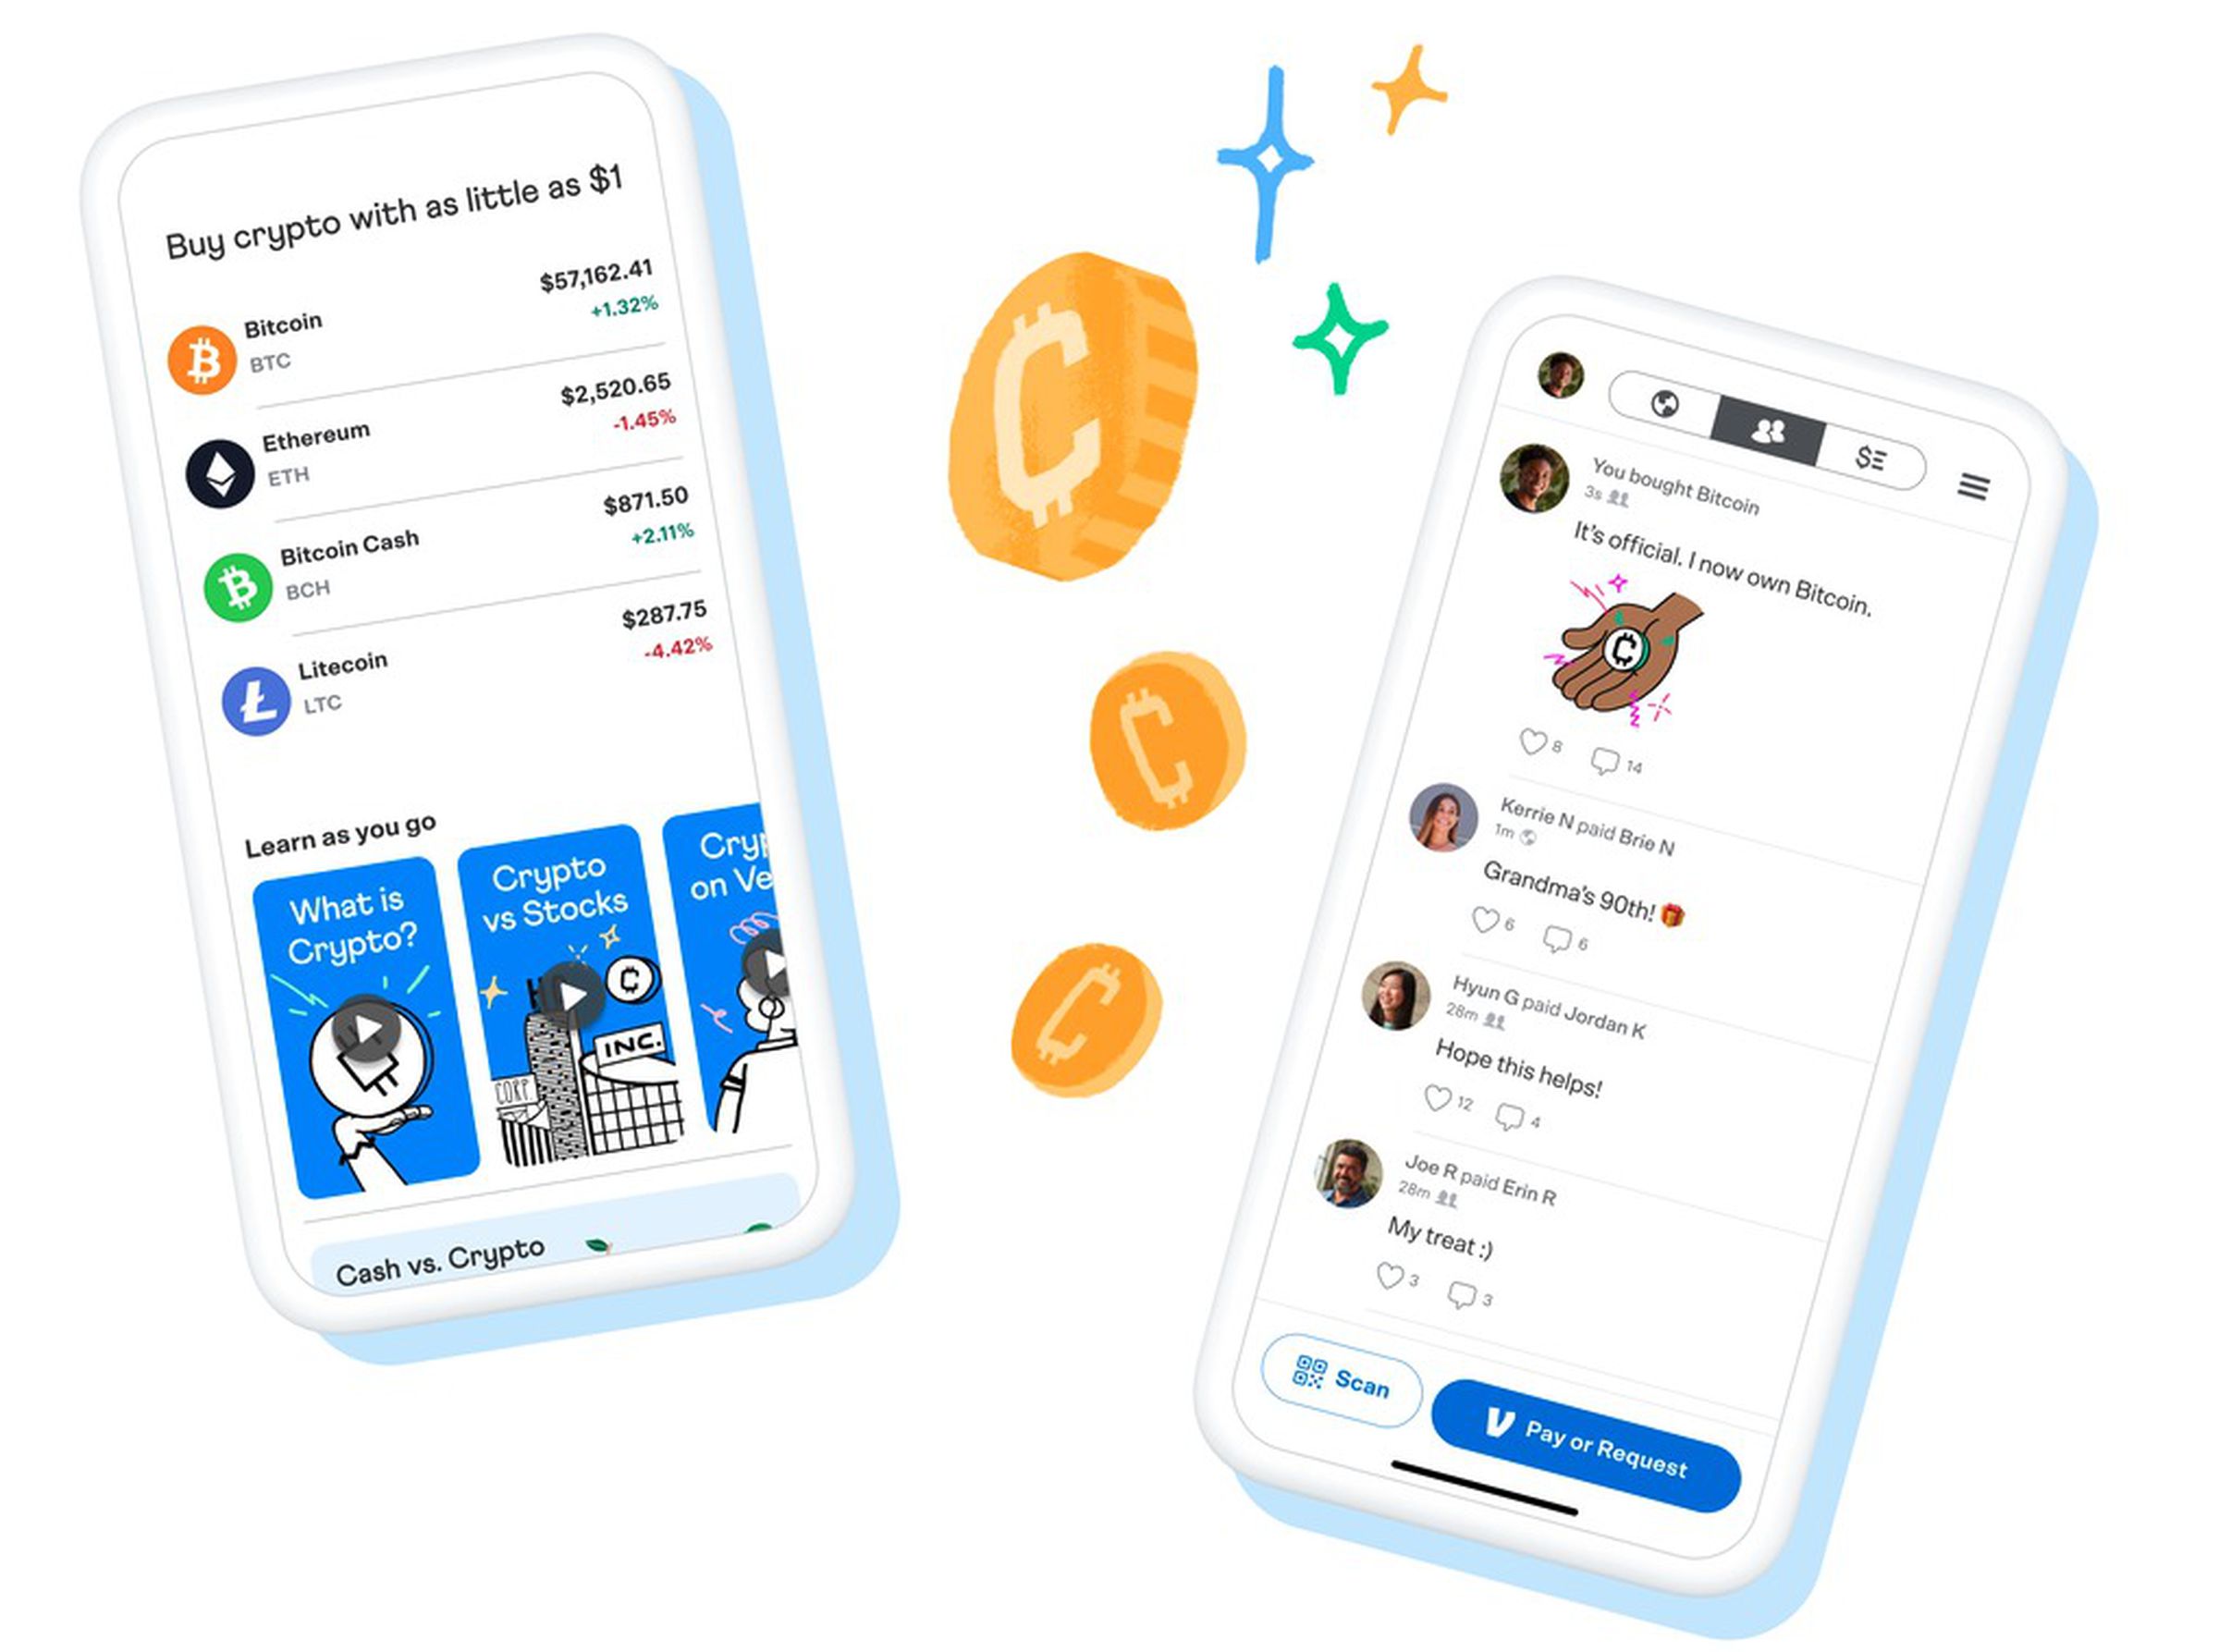 All cryptocurrency transactions will be managed directly from the Venmo app.